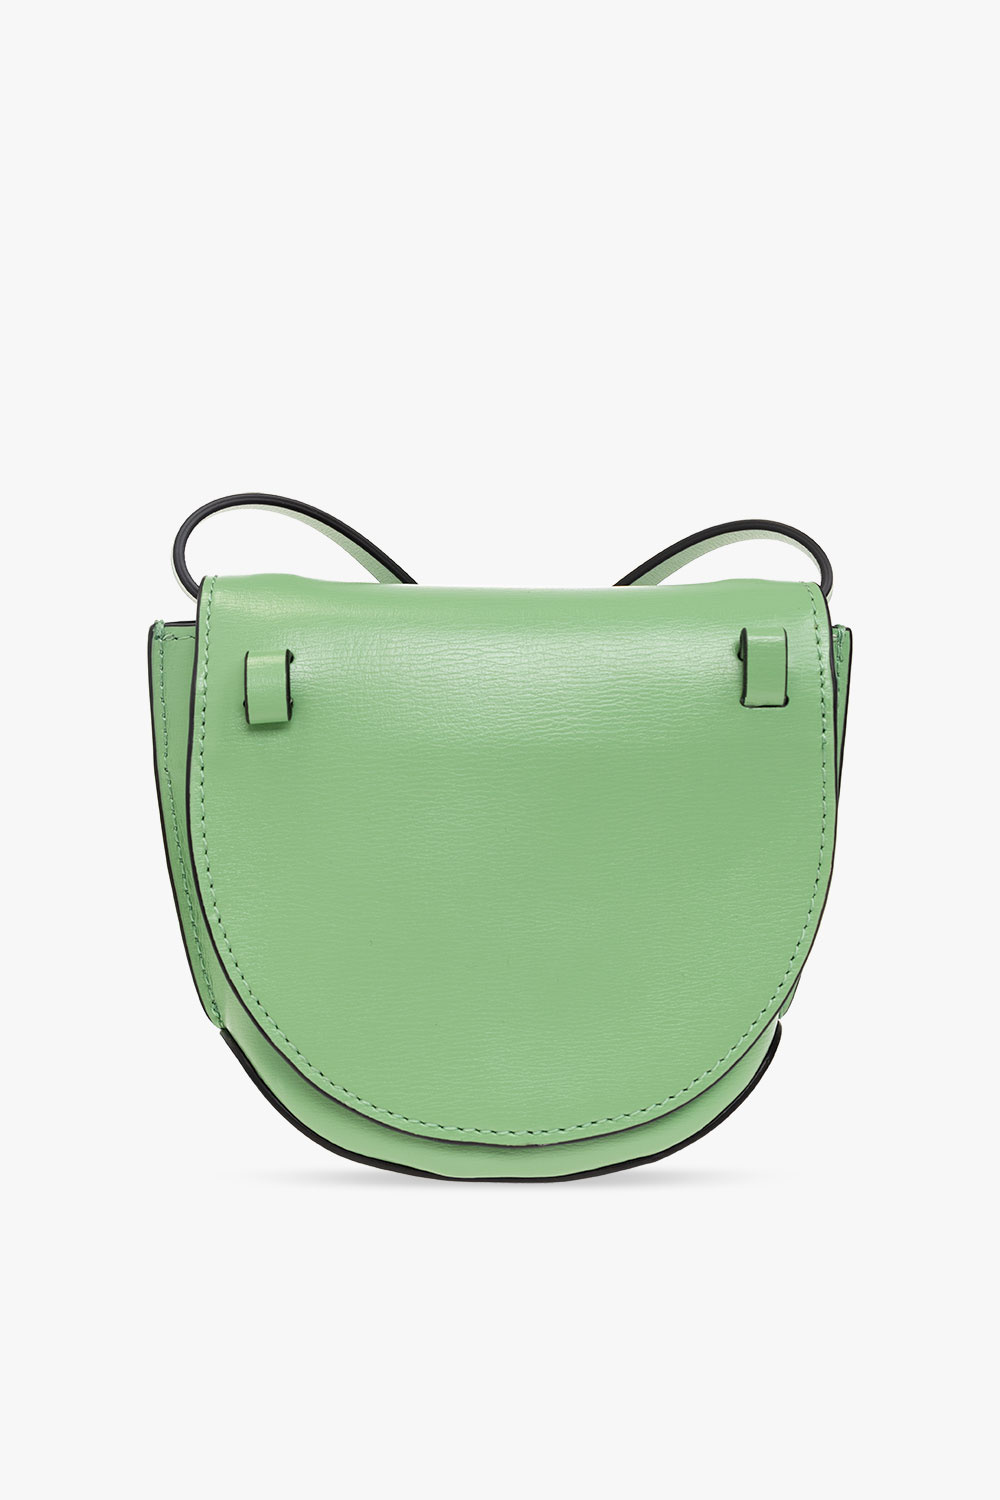 Ganni The latest collection from has me lusting over a mini Men bag